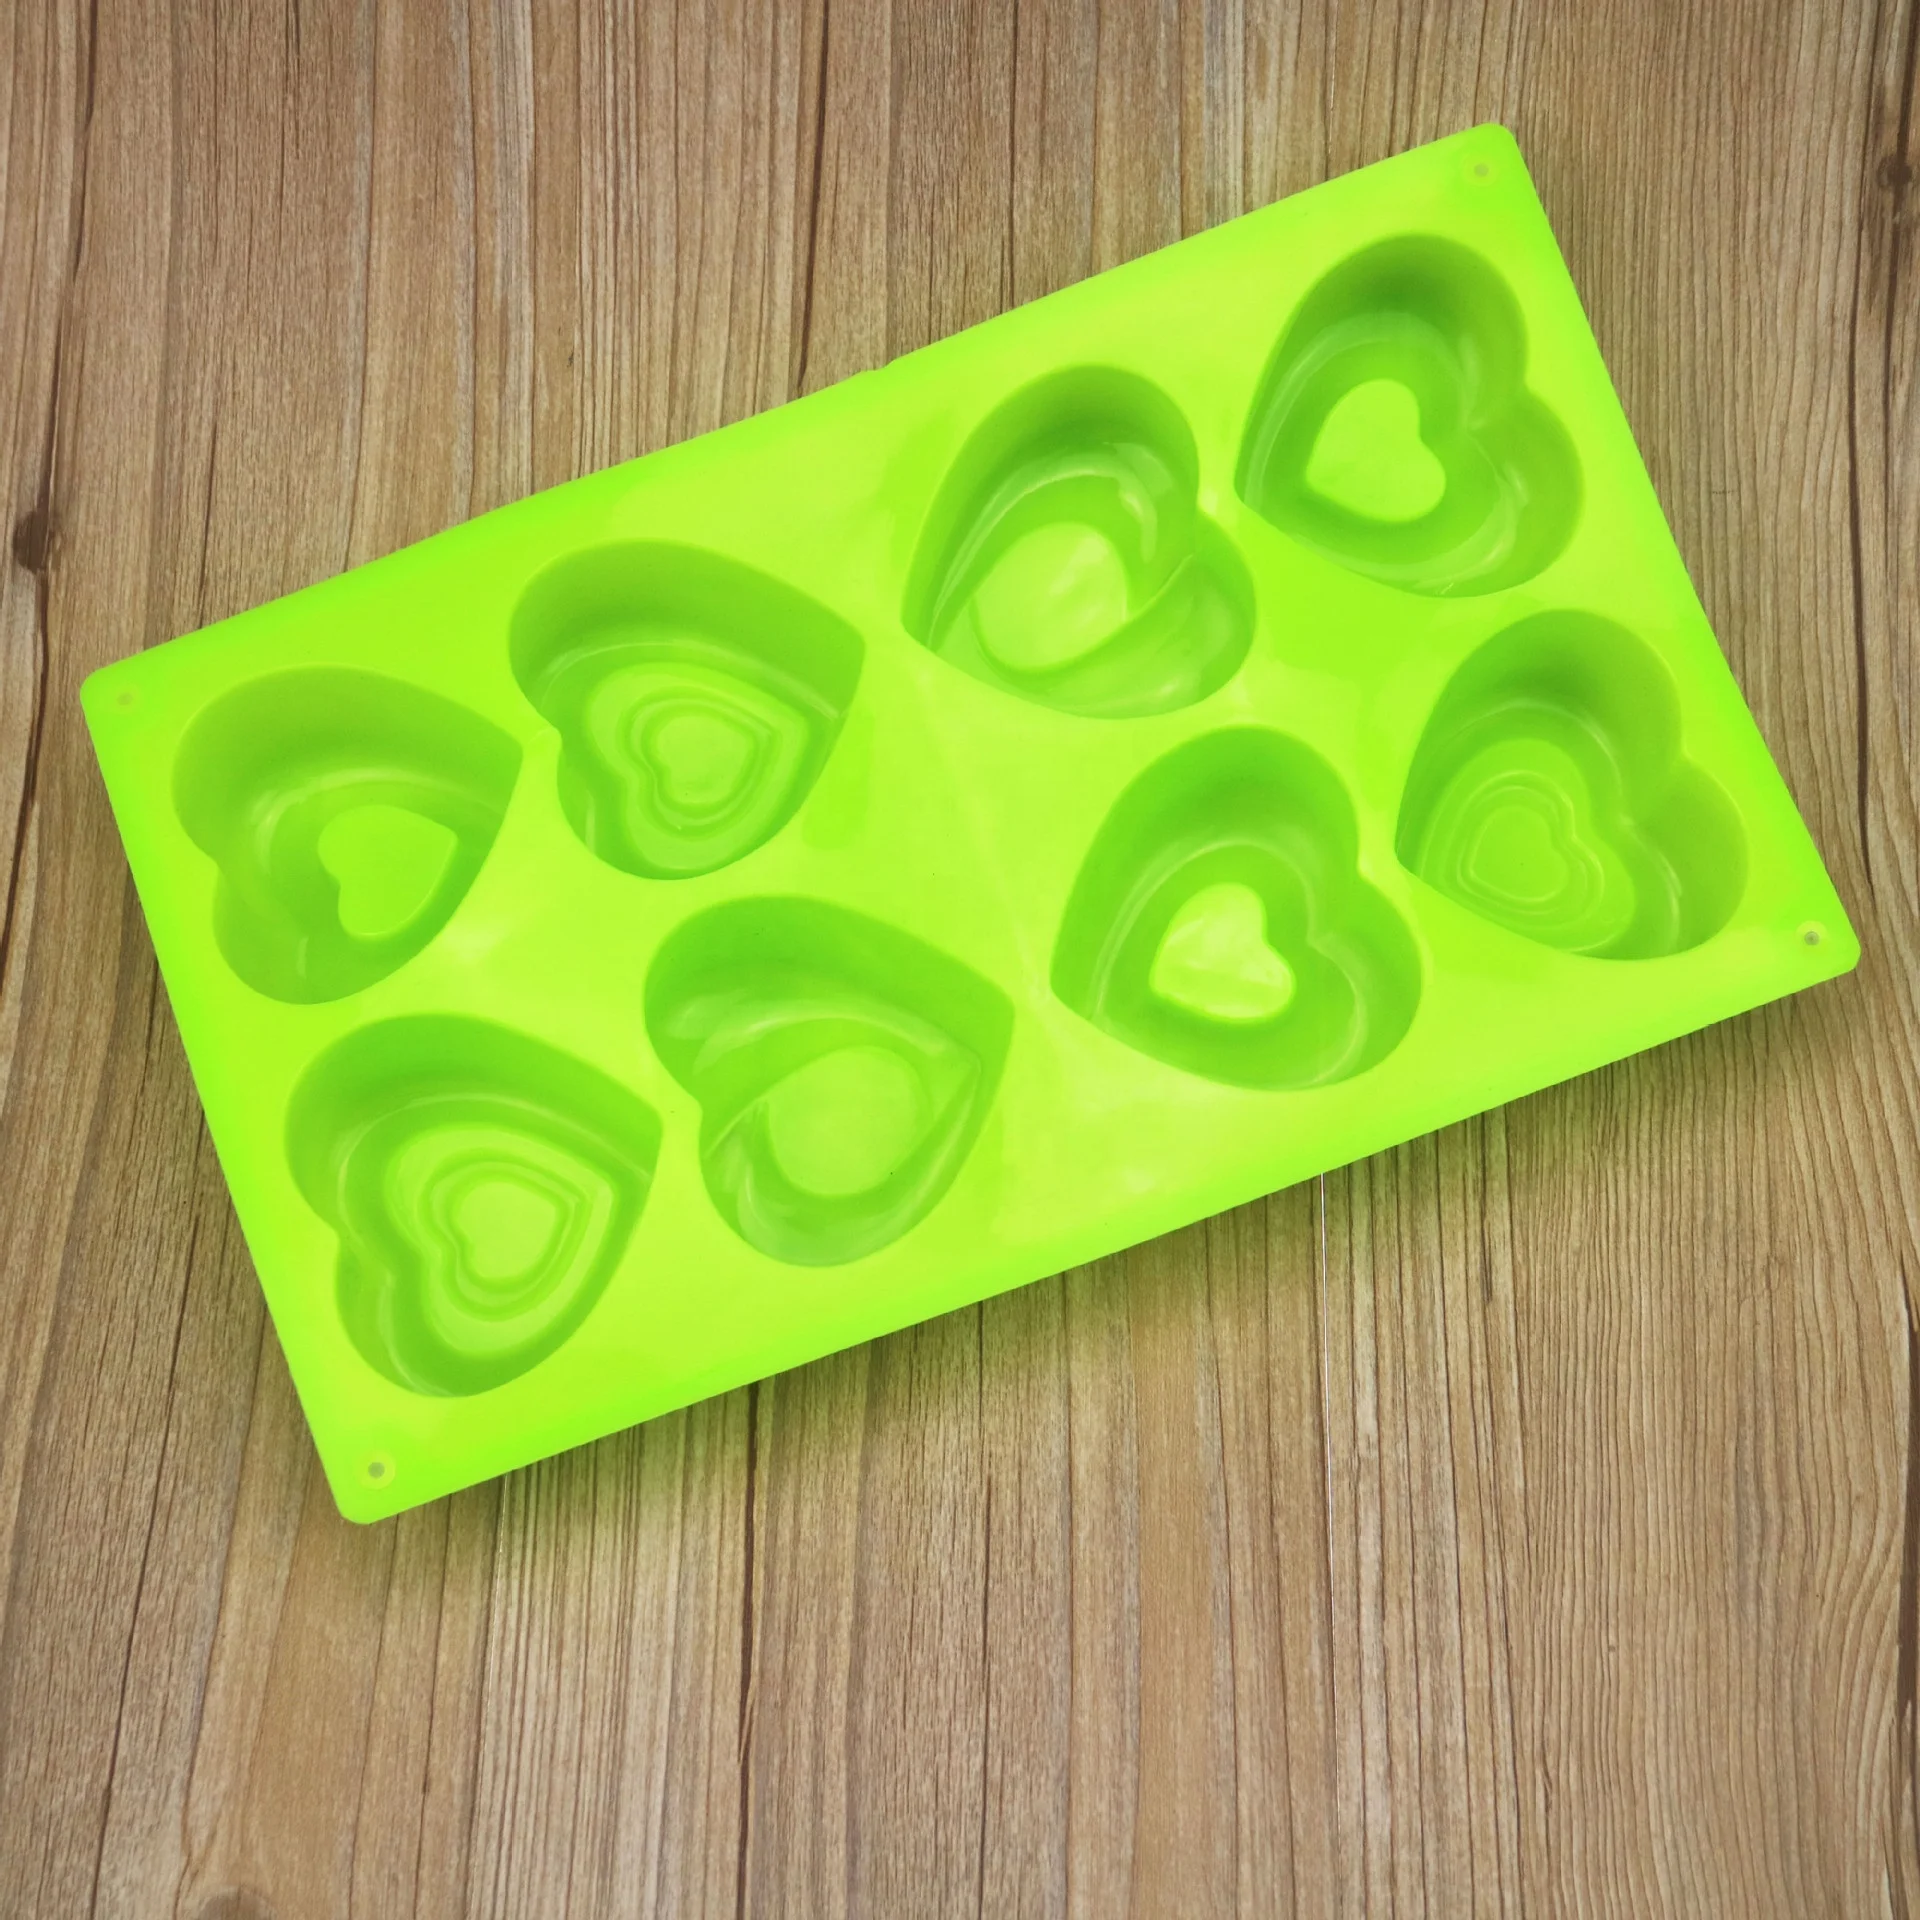 8 Holes Love Heart Shape Silicone Mold for Mousse,Chocolate,Soap,Dessert Cake Baking Tray